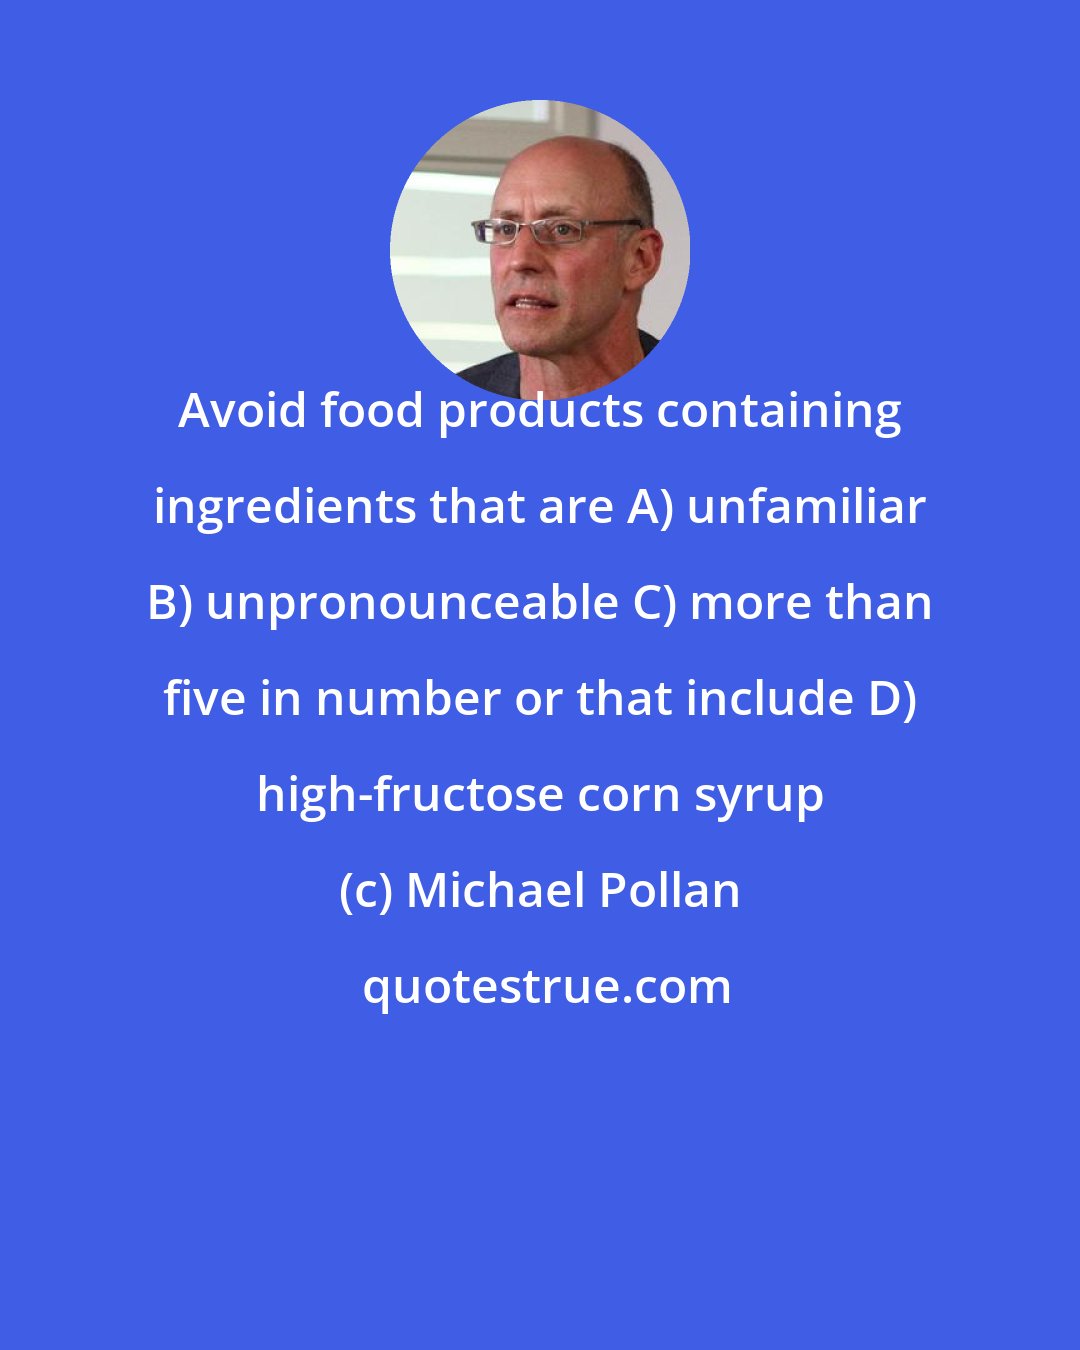 Michael Pollan: Avoid food products containing ingredients that are A) unfamiliar B) unpronounceable C) more than five in number or that include D) high-fructose corn syrup